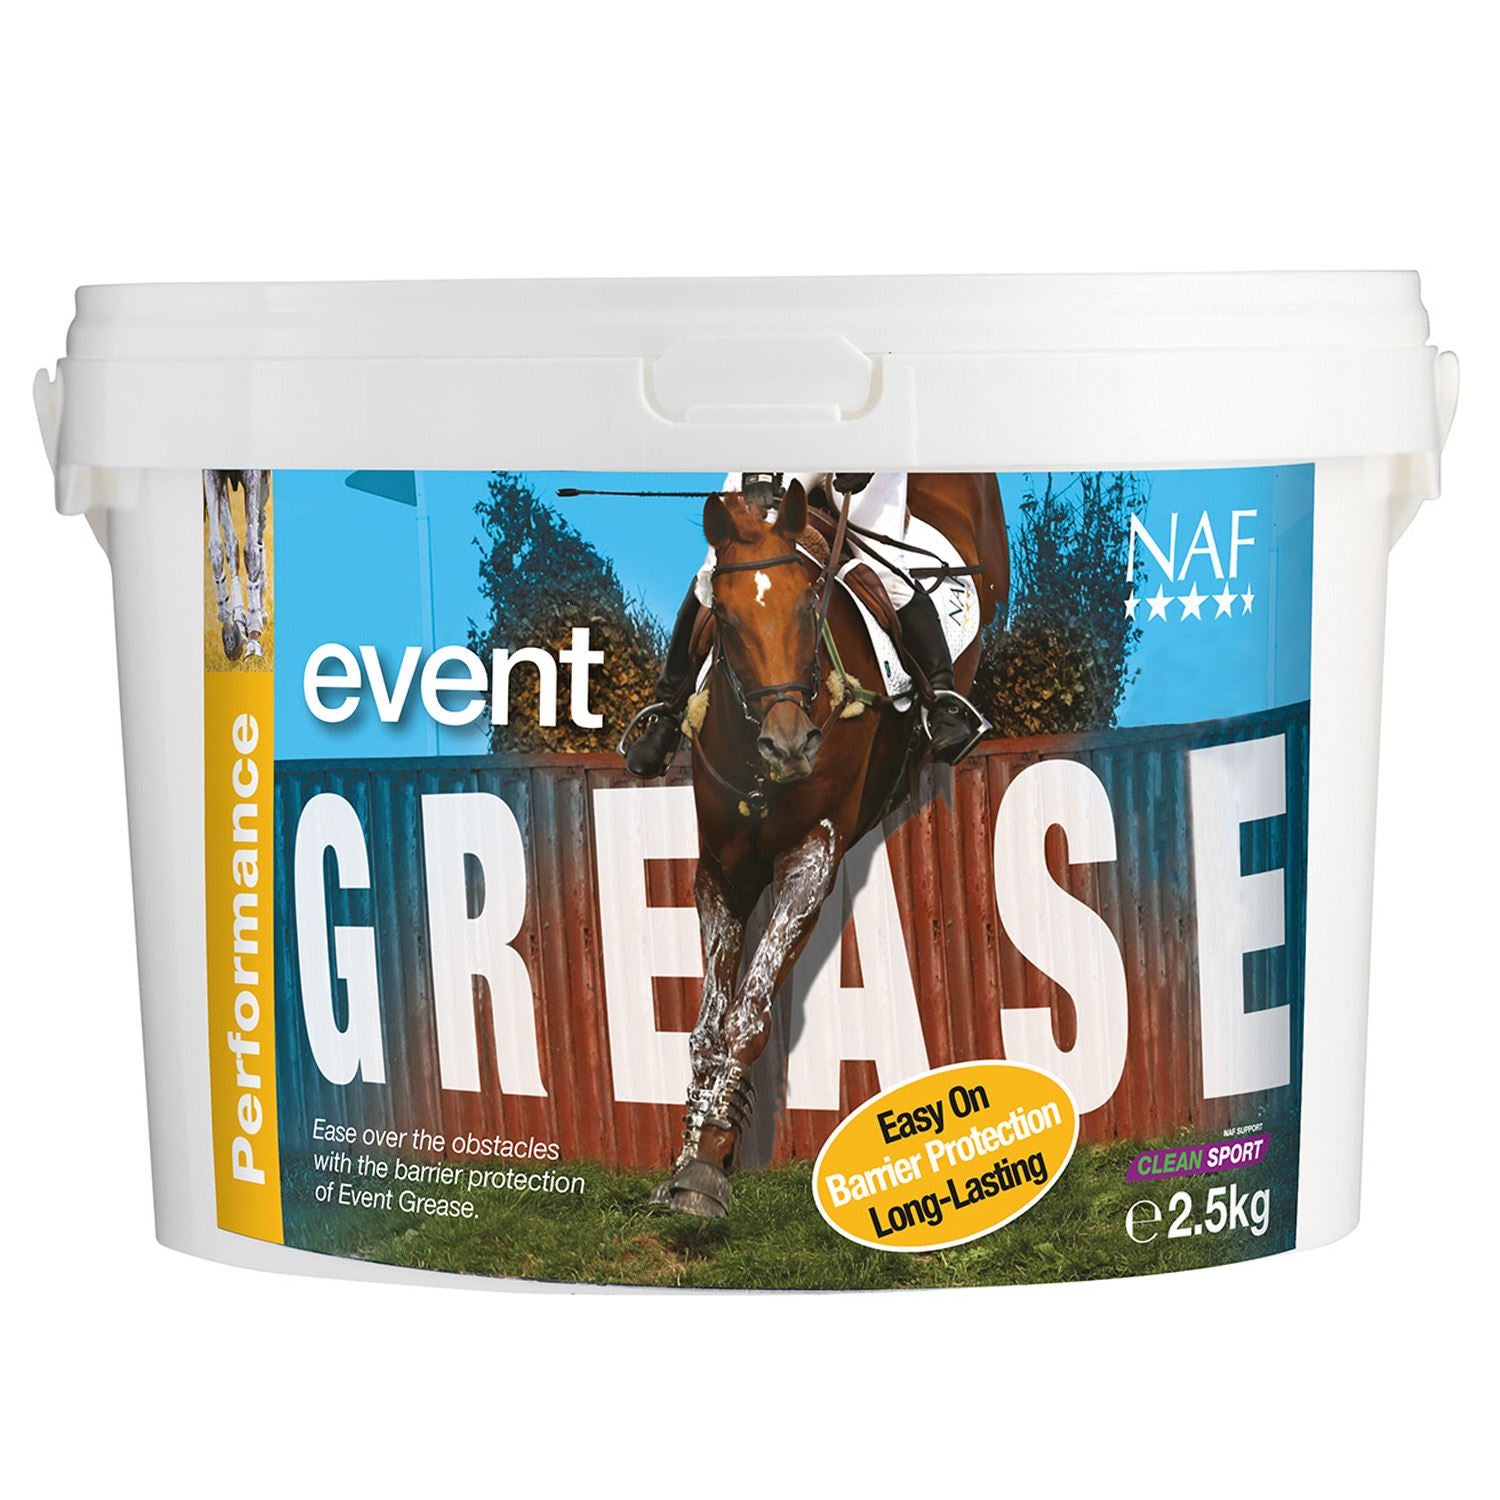 Naf Event Grease - Just Horse Riders